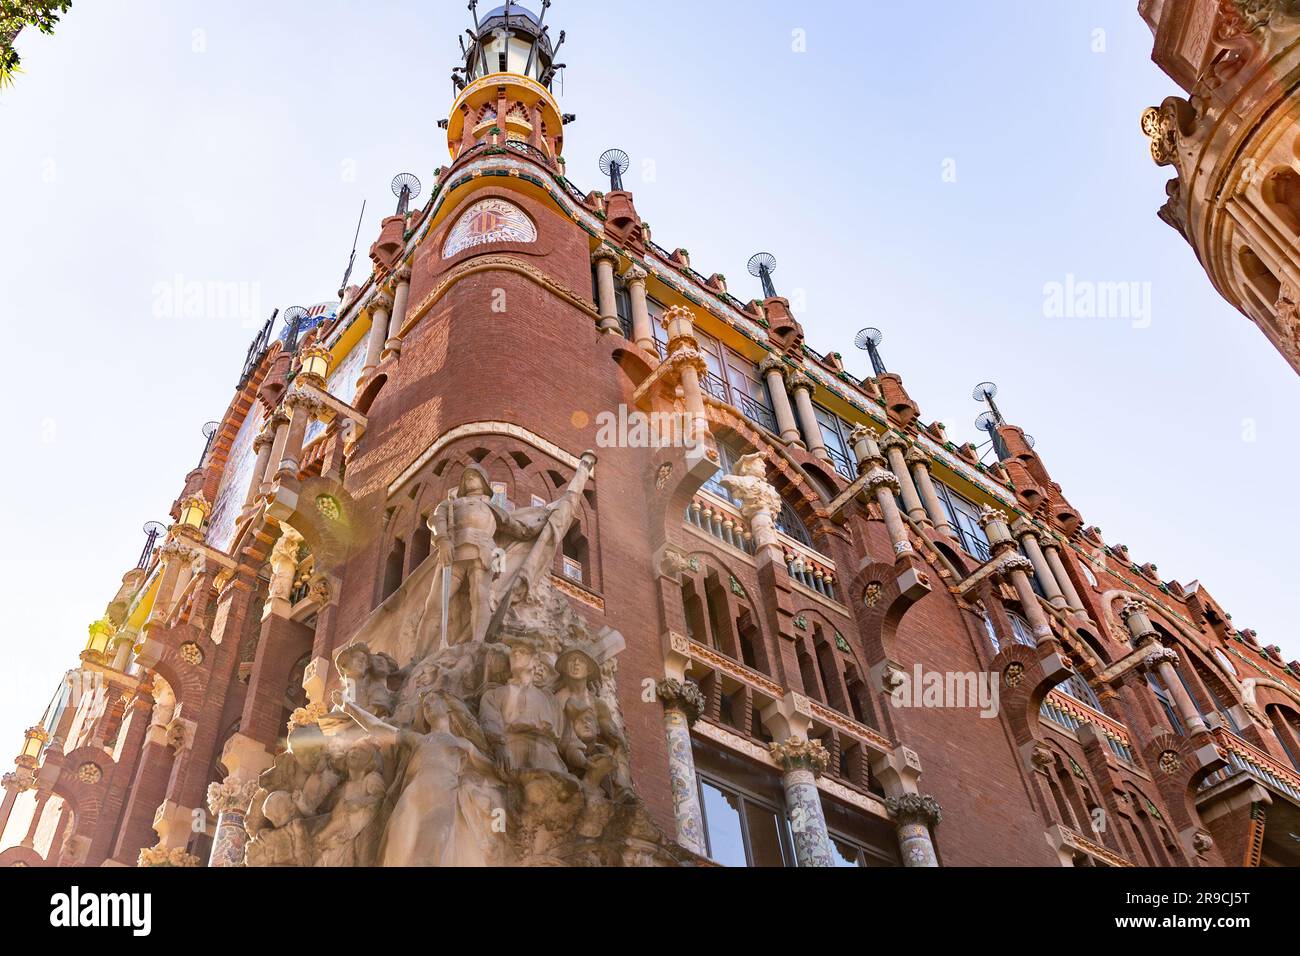 Barcelona, Spain - FEB 10, 2022: Palau de la Musica Catalana is a concert hall designed in the Catalan modernista style, built between 1905 and 1908. Stock Photo